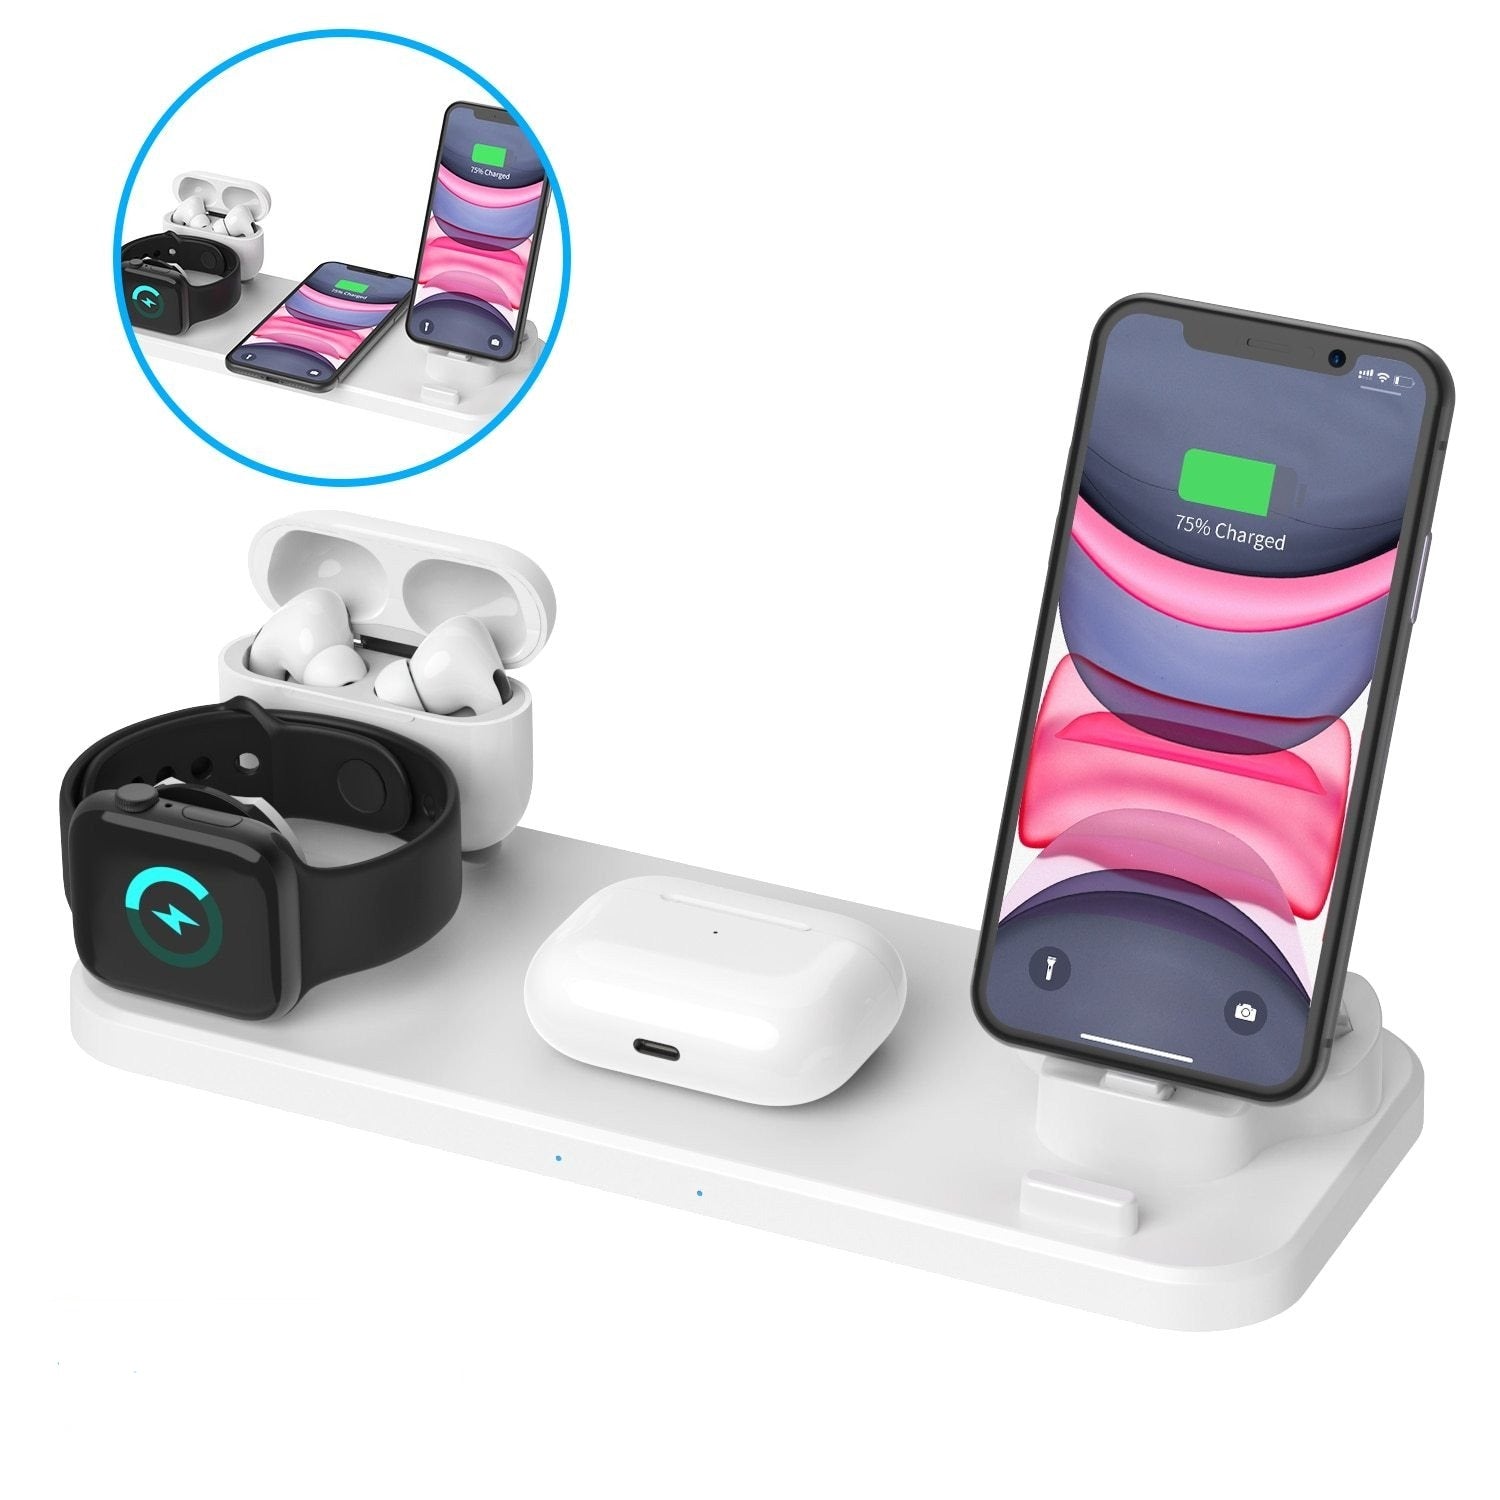 6-in-1 Wireless Charging Station - Influcase